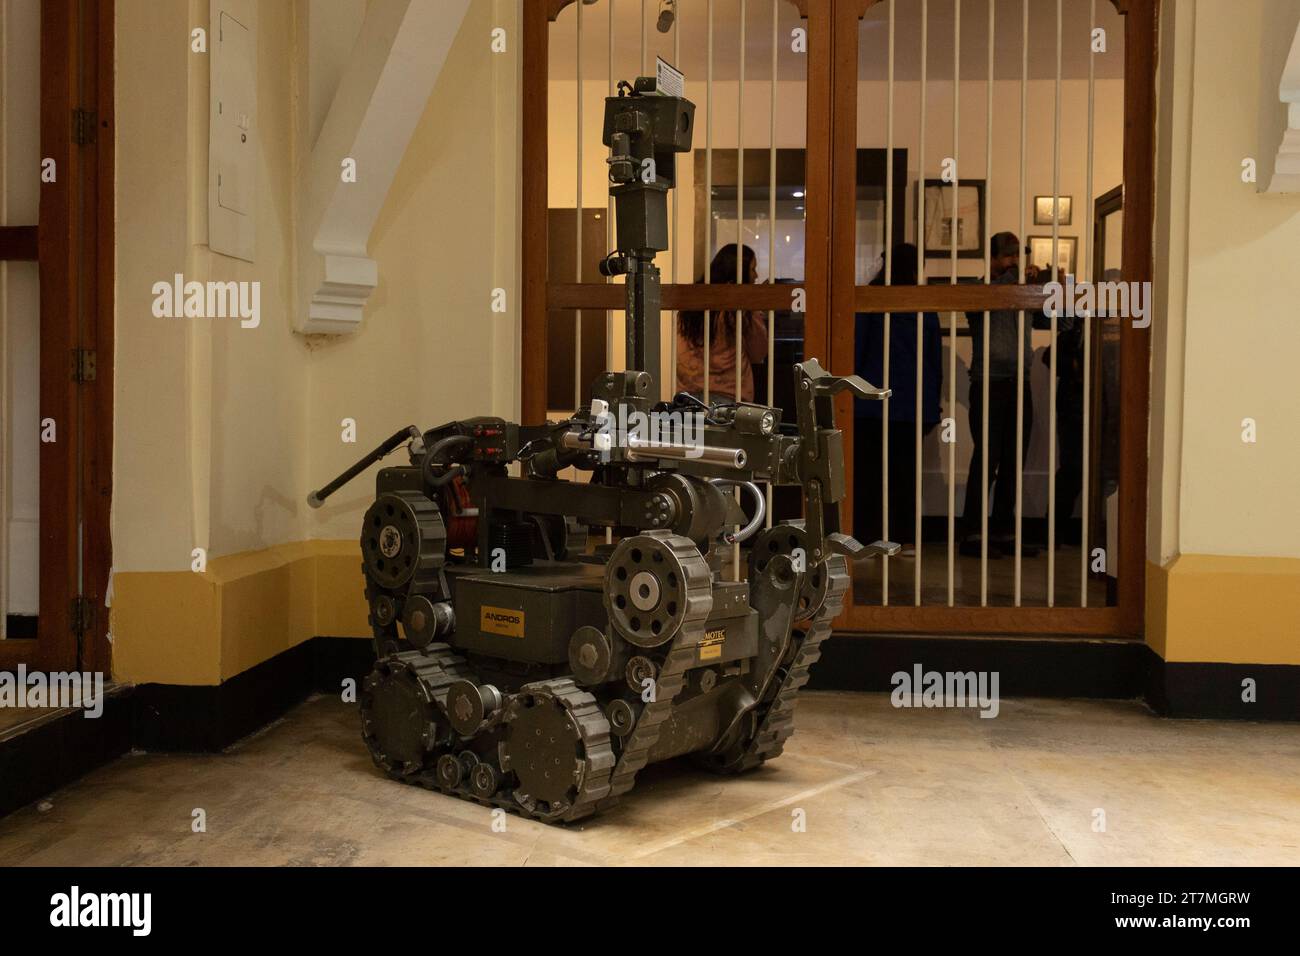 Anti bomb robot at exhibition on colombian police museum Stock Photo